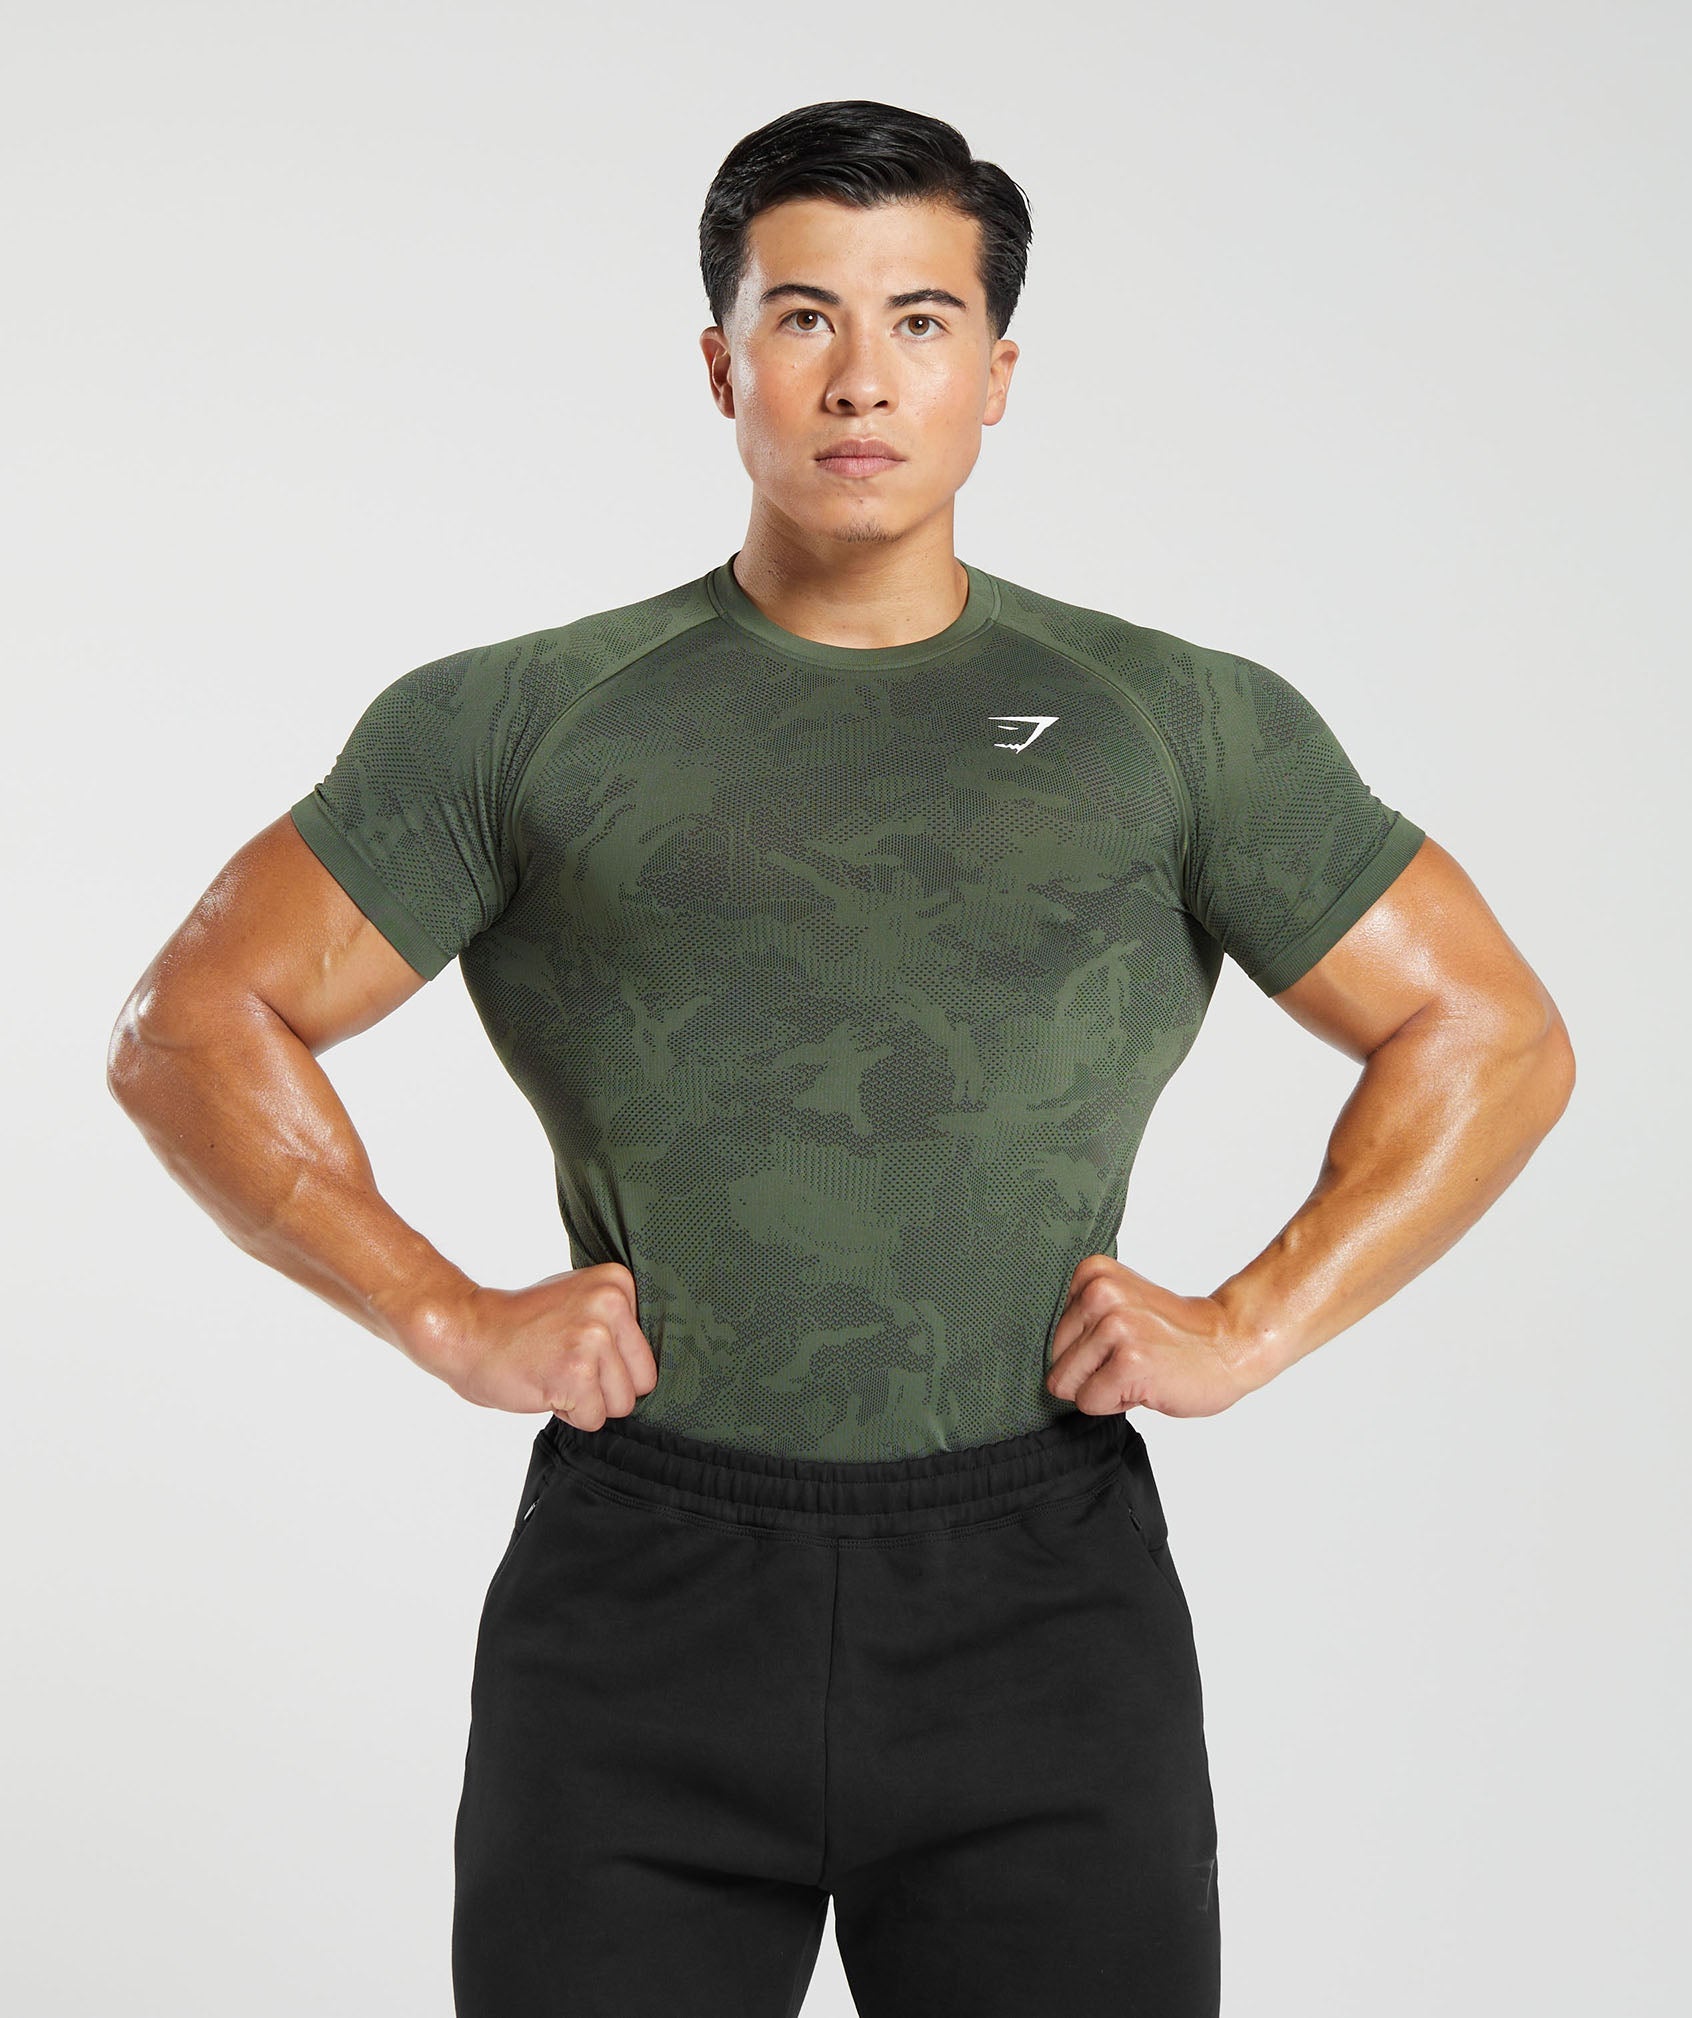 Geo Seamless T-Shirt in Core Olive/Black is out of stock